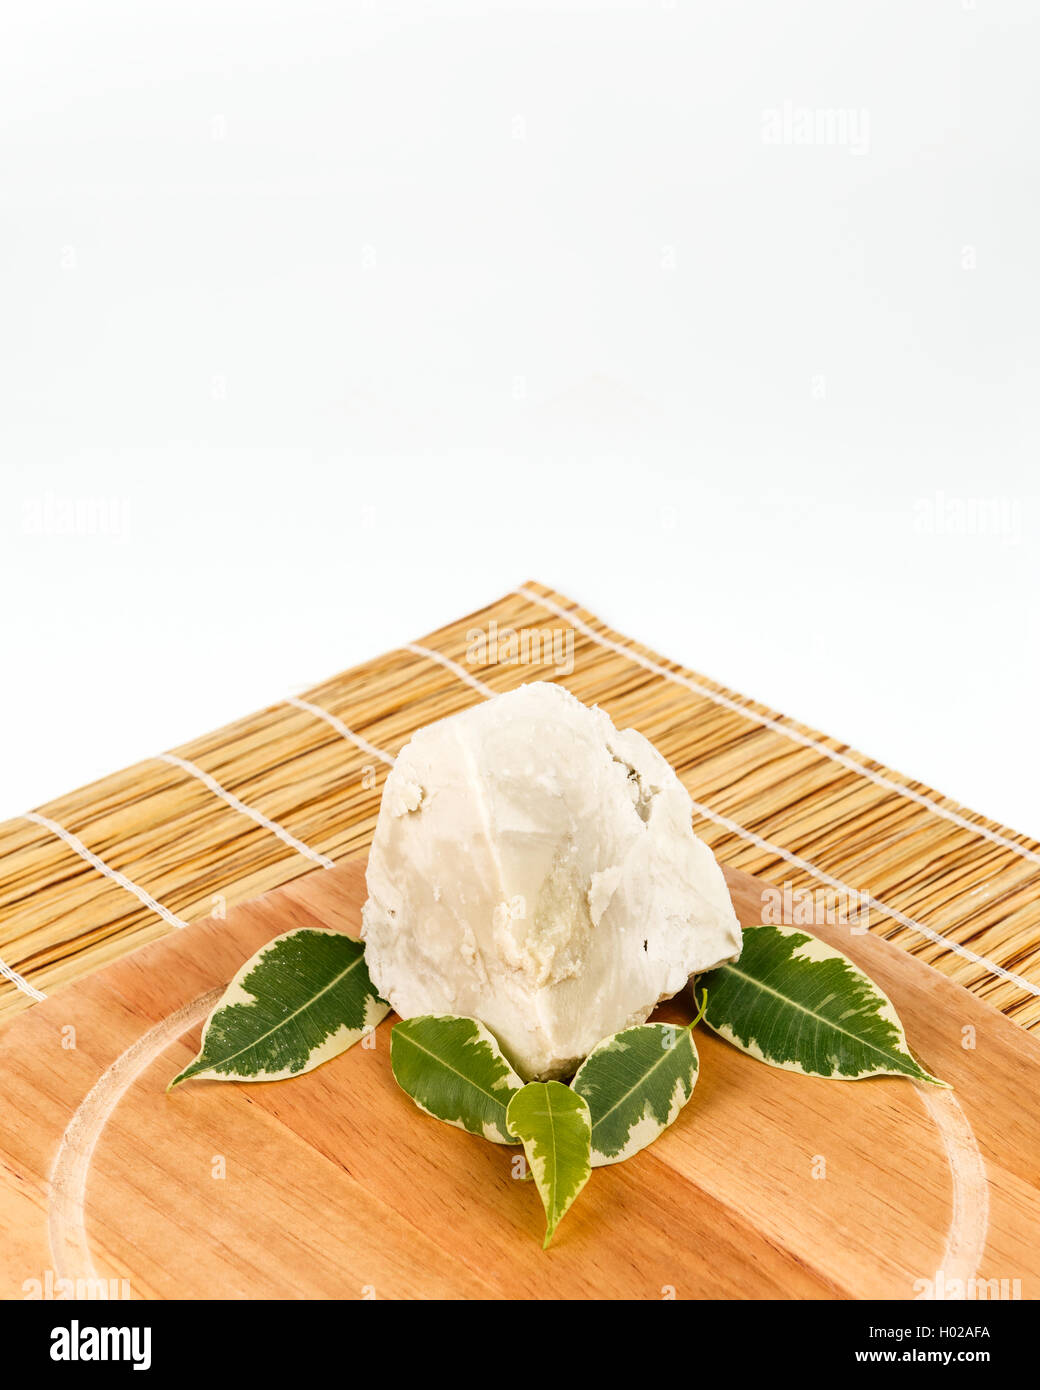 Unrefined, organic Shea butter with green leaves laying on the wooden board which is laying on the straw mat. Stock Photo